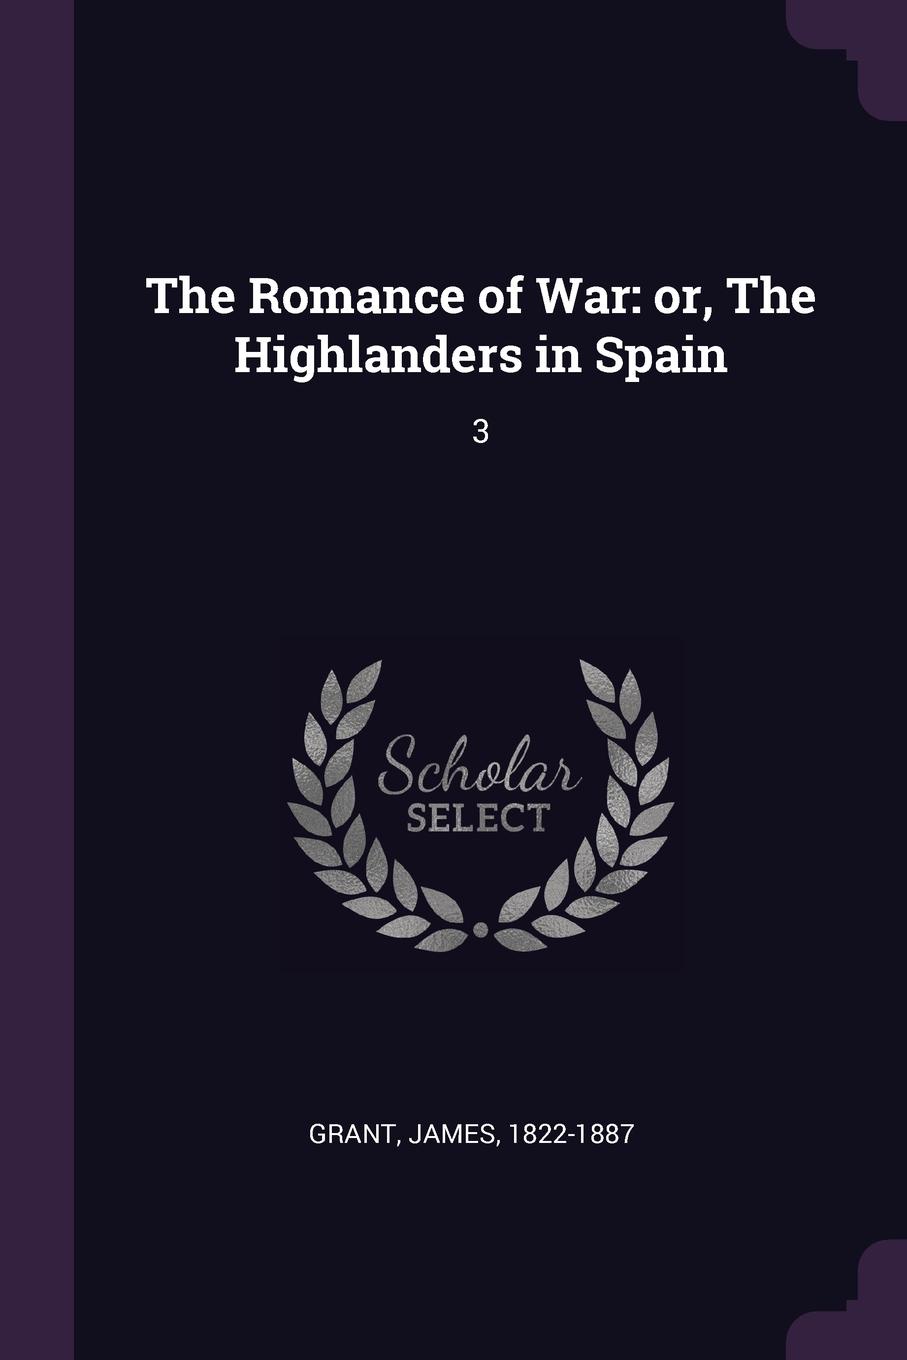 The Romance of War. or, The Highlanders in Spain: 3